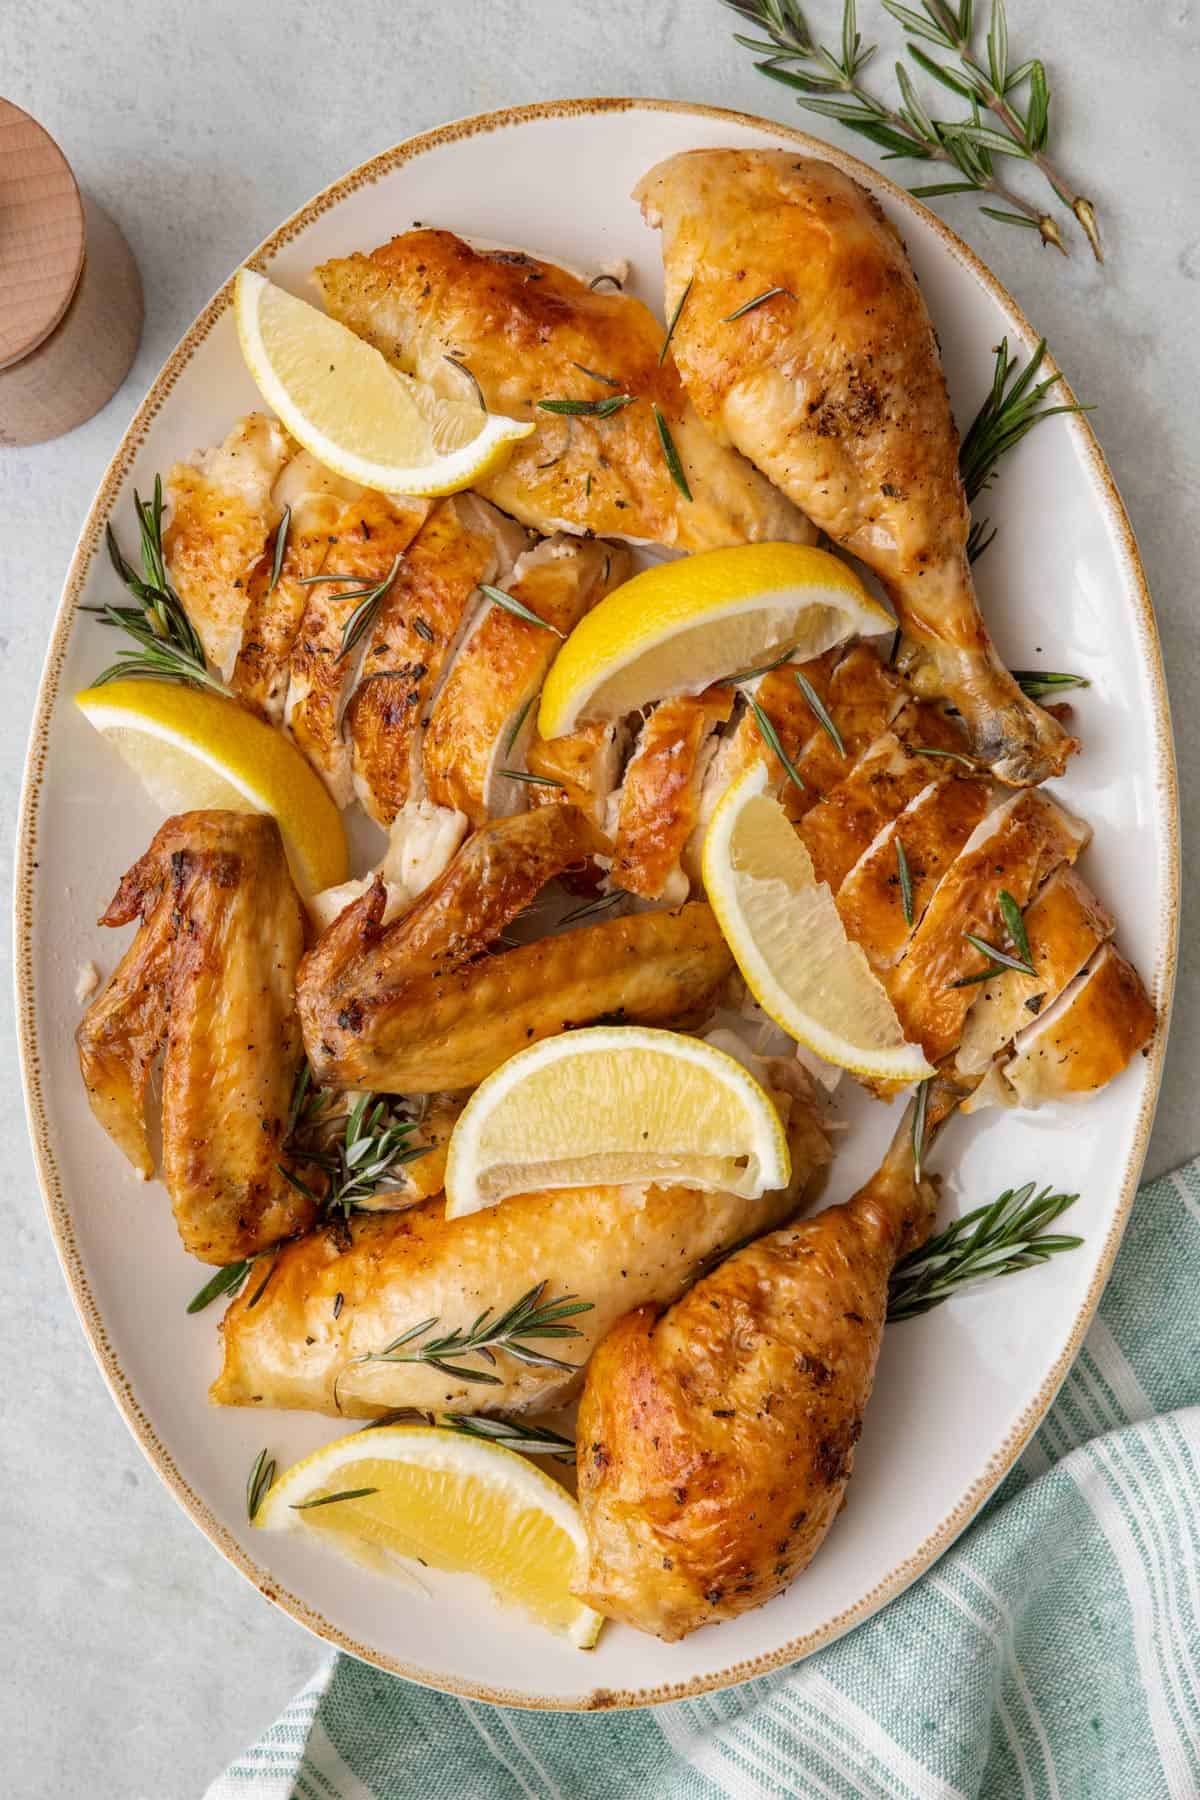 Roasted chicken broken down into thighs, wings, legs, and sliced breast displayed on a platter with fresh rosemary and lemon slices or wedges.